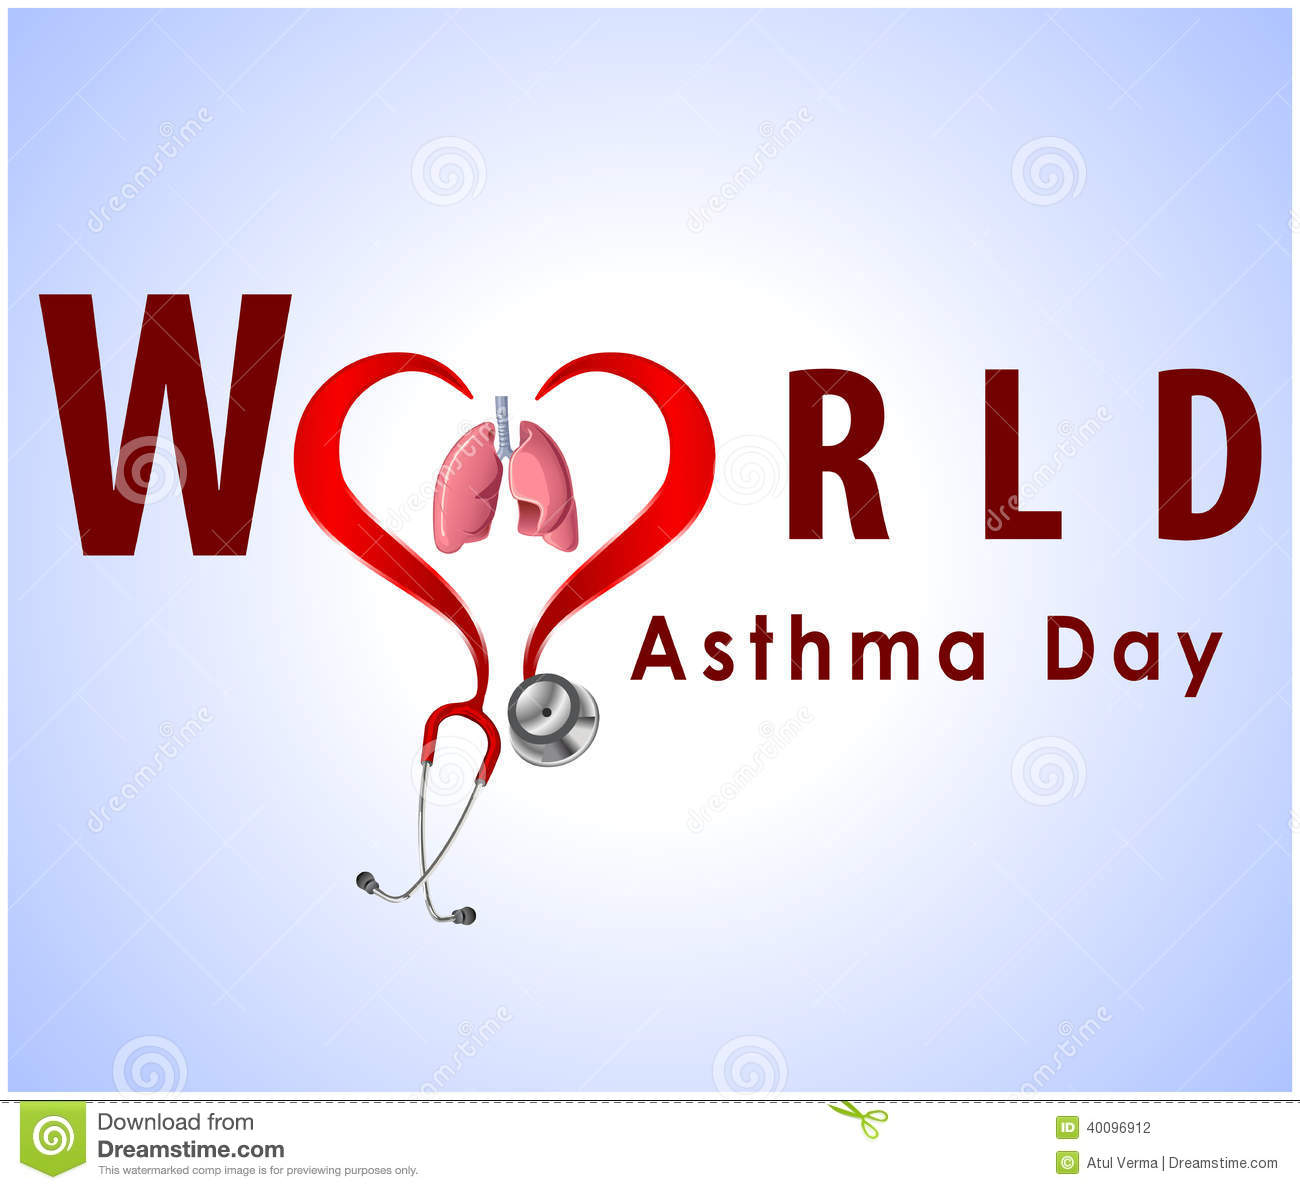 World Asthma Day Lungs With Heart Shaped Stethoscope Illustration